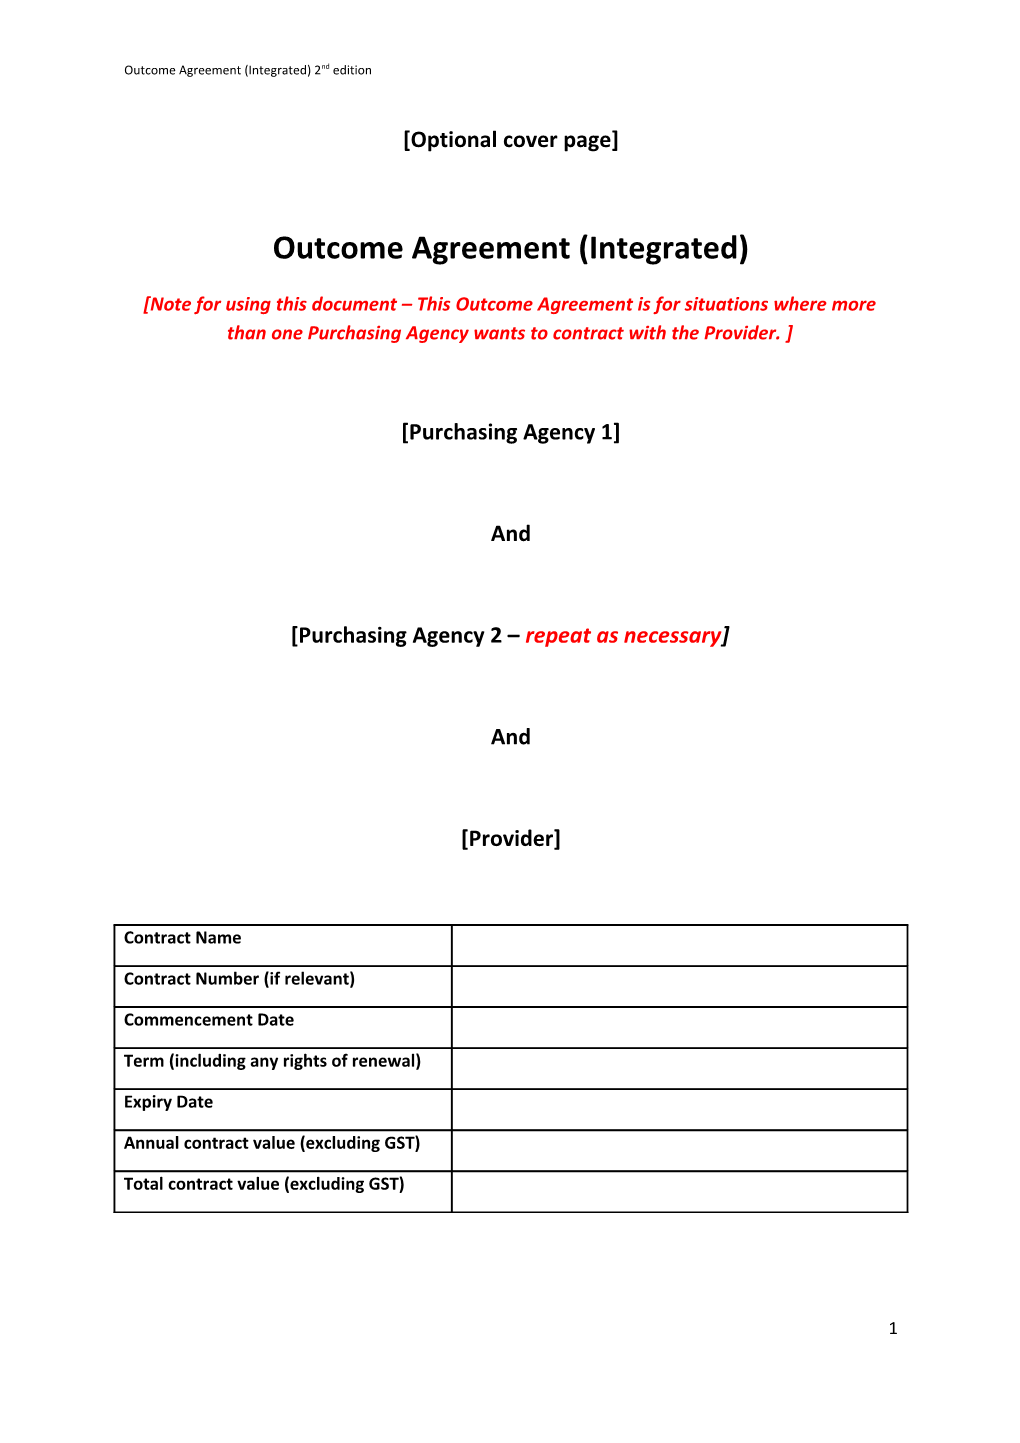 Outcome Agreement (Integrated) - 2Nd Edition